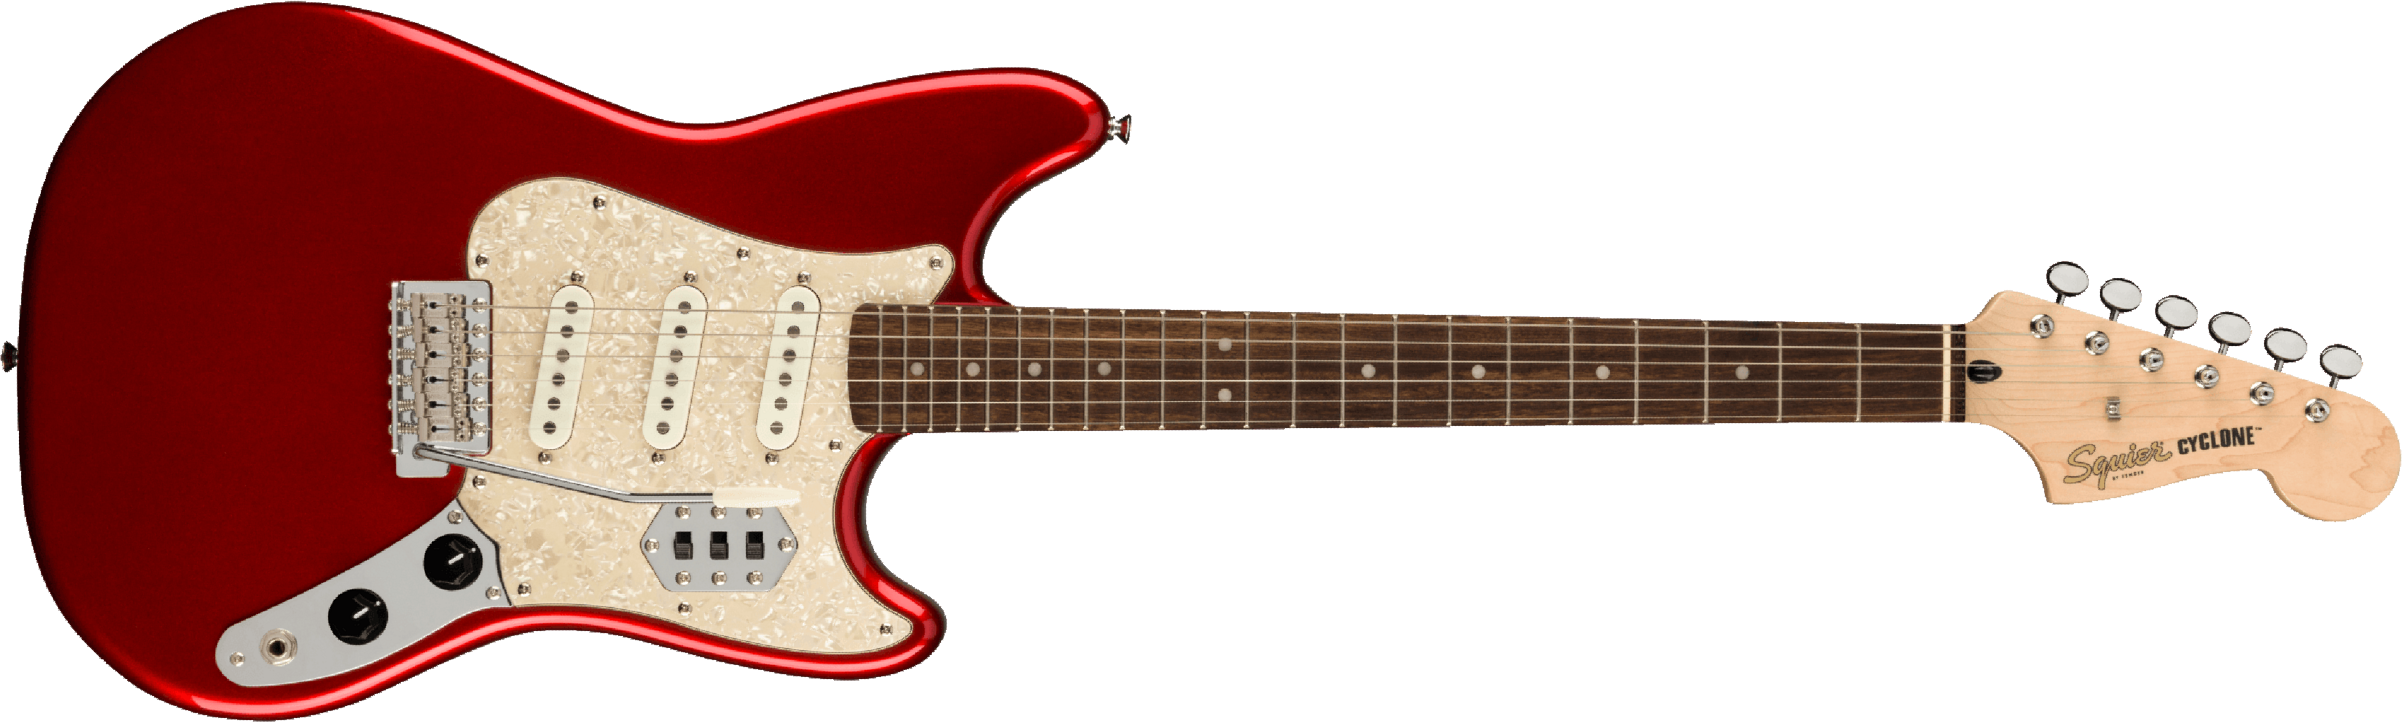 Squier Cyclone Paranormal 3s Trem Lau - Candy Apple Red - Guitarra electrica retro rock - Main picture